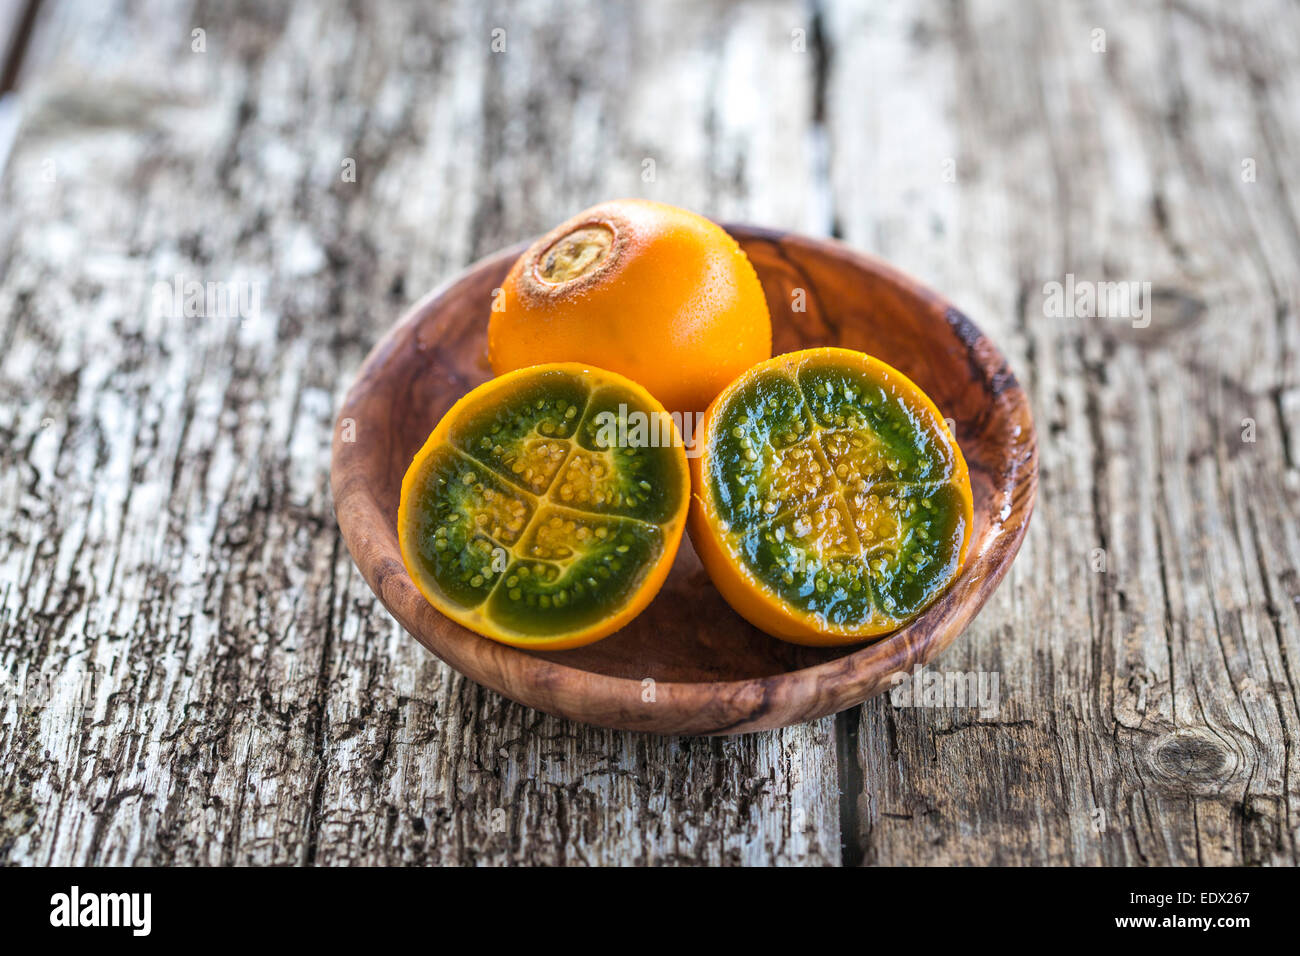 cut vibrant green and orange fleshed naranjilla in a wood bowl on rustic wood table Stock Photo